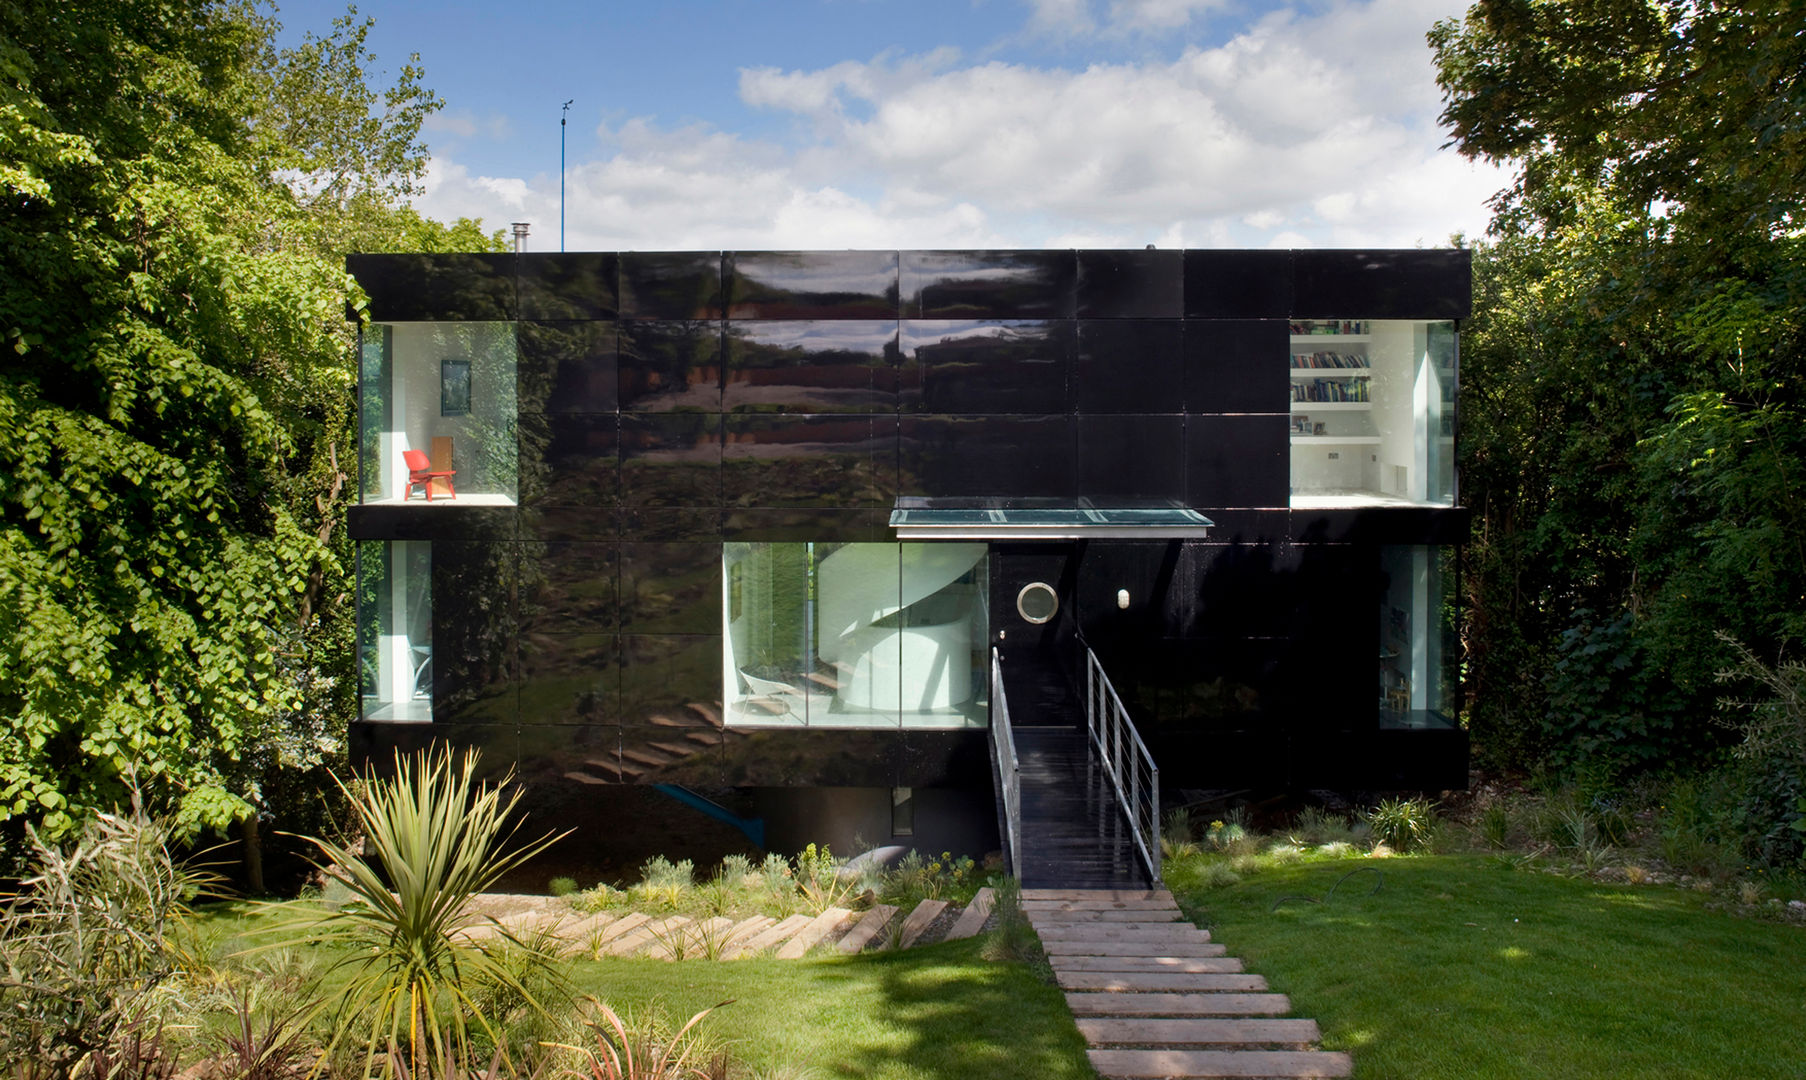 Welch House, The Manser Practice Architects + Designers The Manser Practice Architects + Designers Modern houses